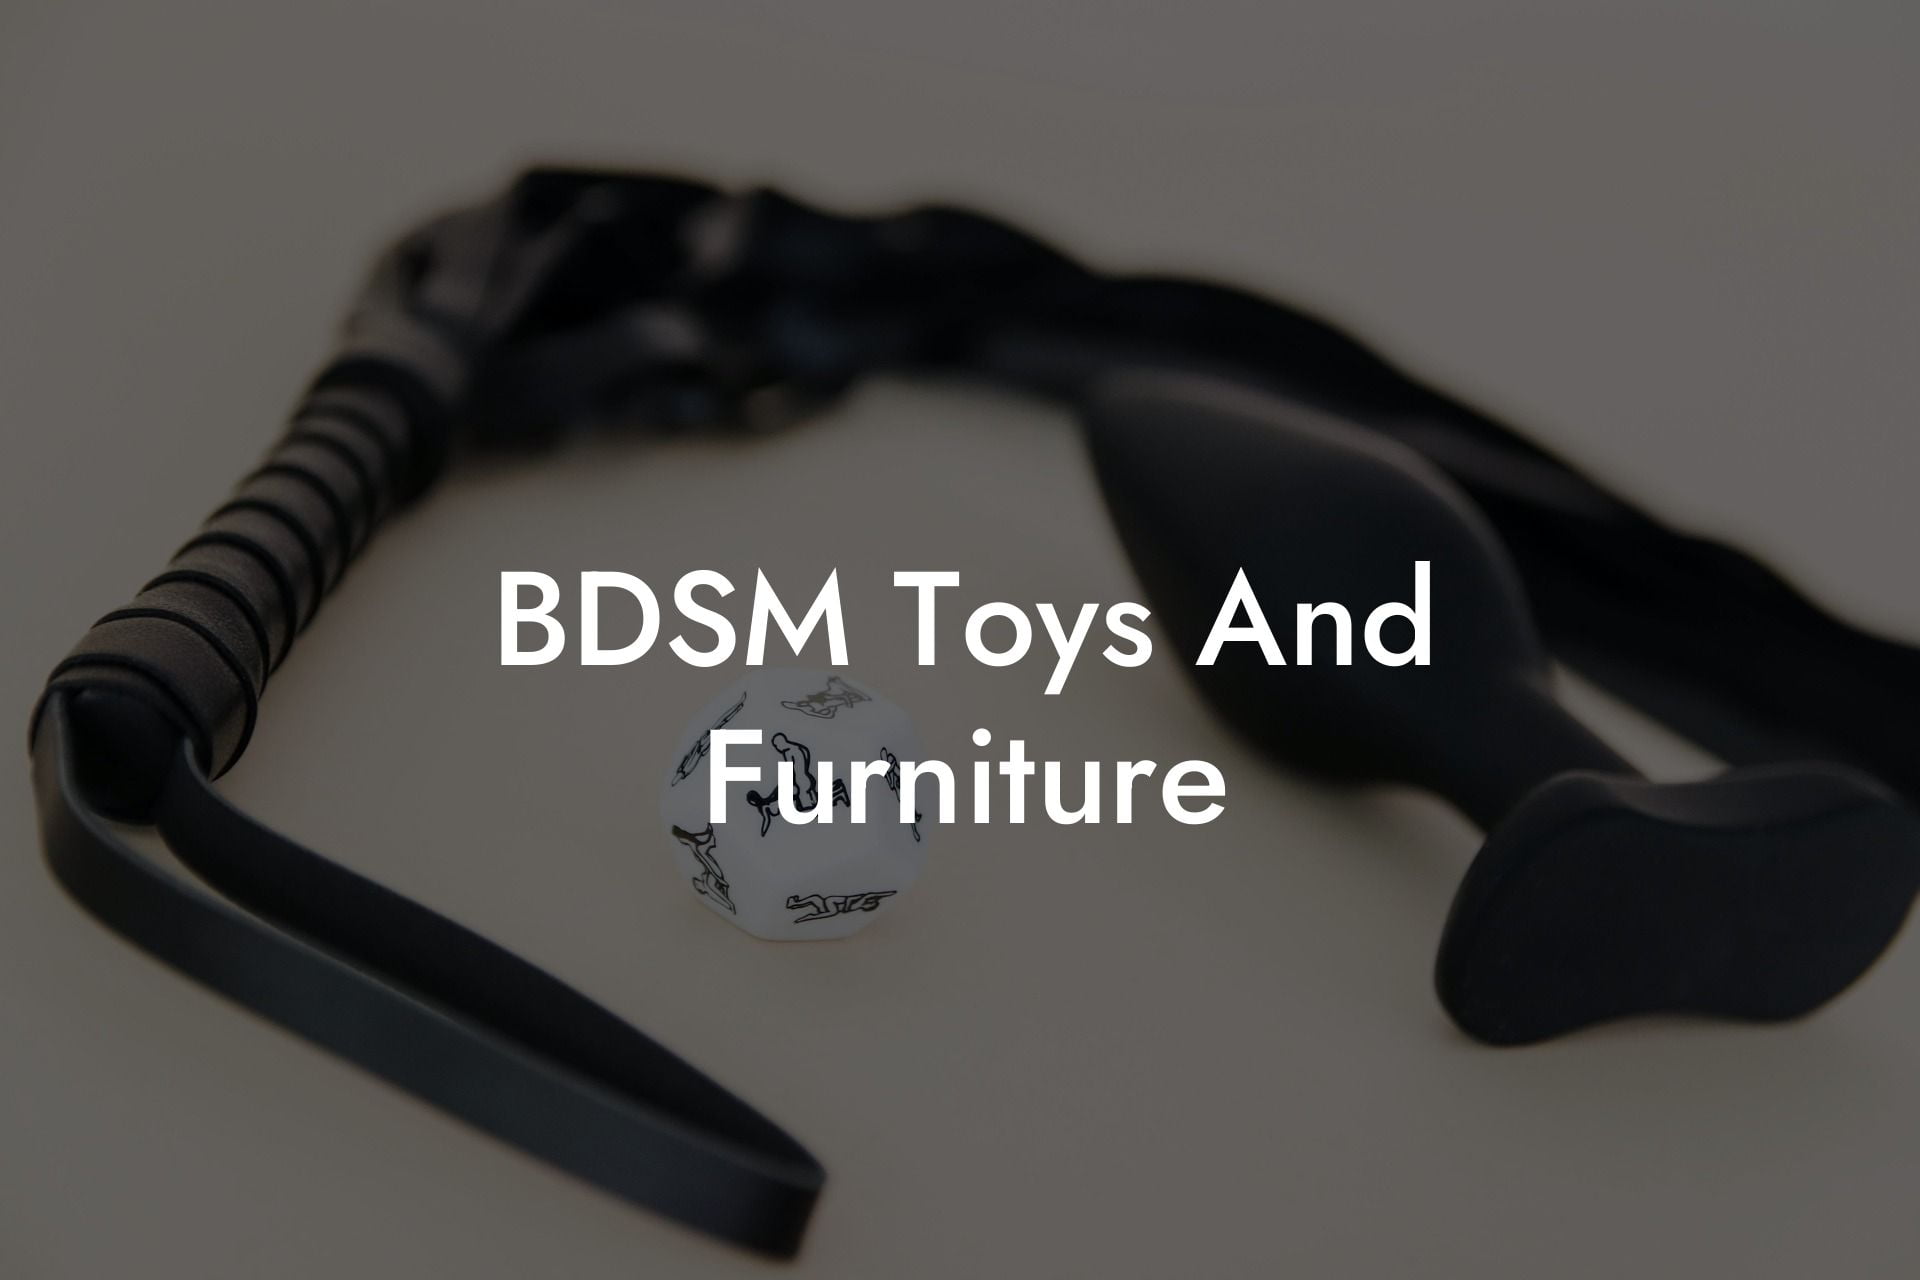 BDSM Toys And Furniture